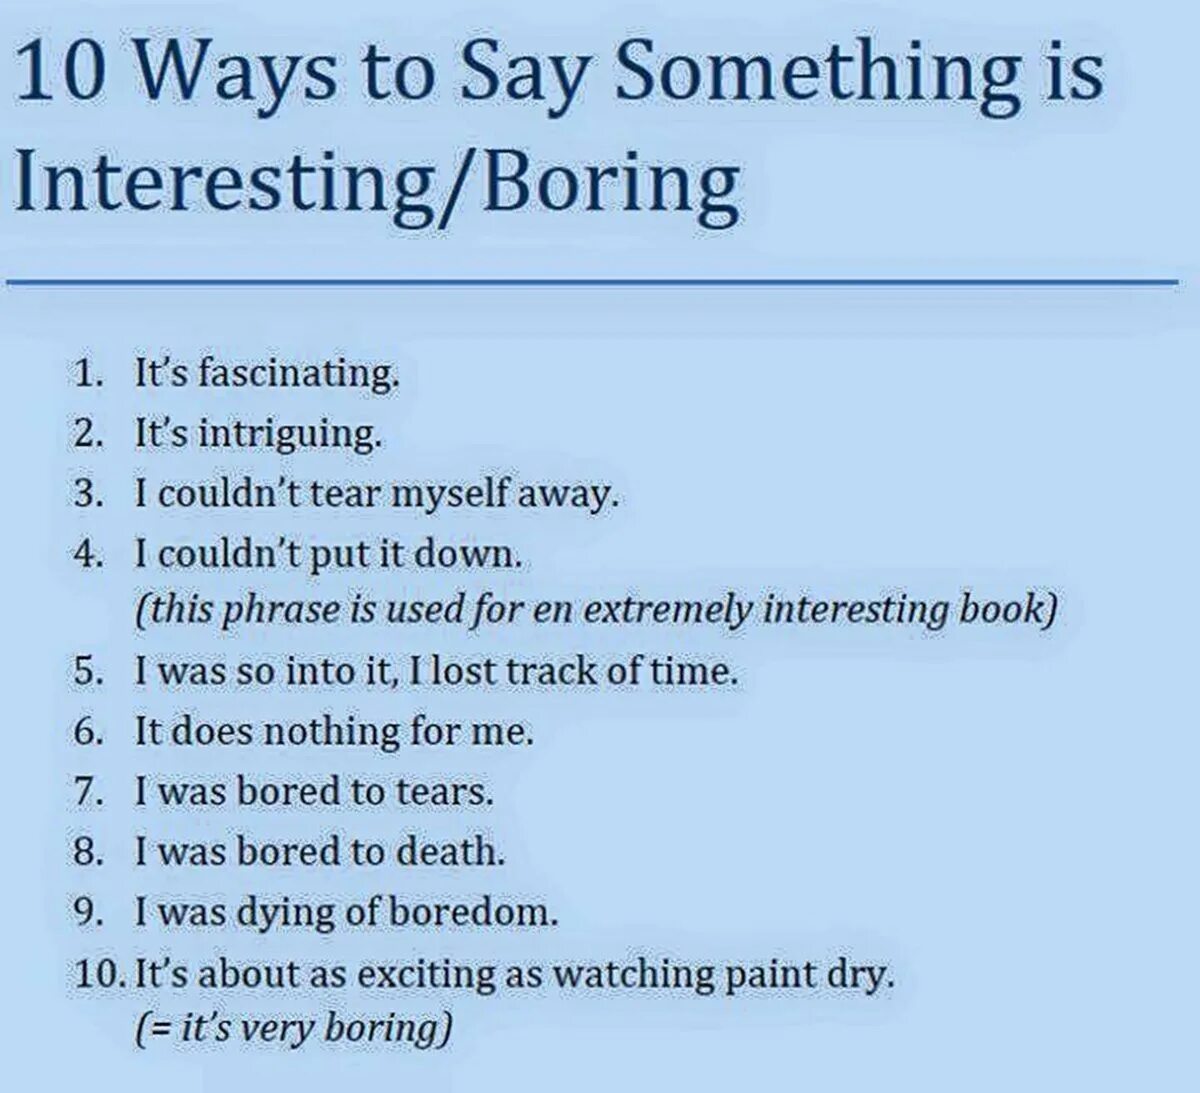 Other ways to say interesting. Other ways to say. Interesting phrases in English. Other ways to say say. Interested время